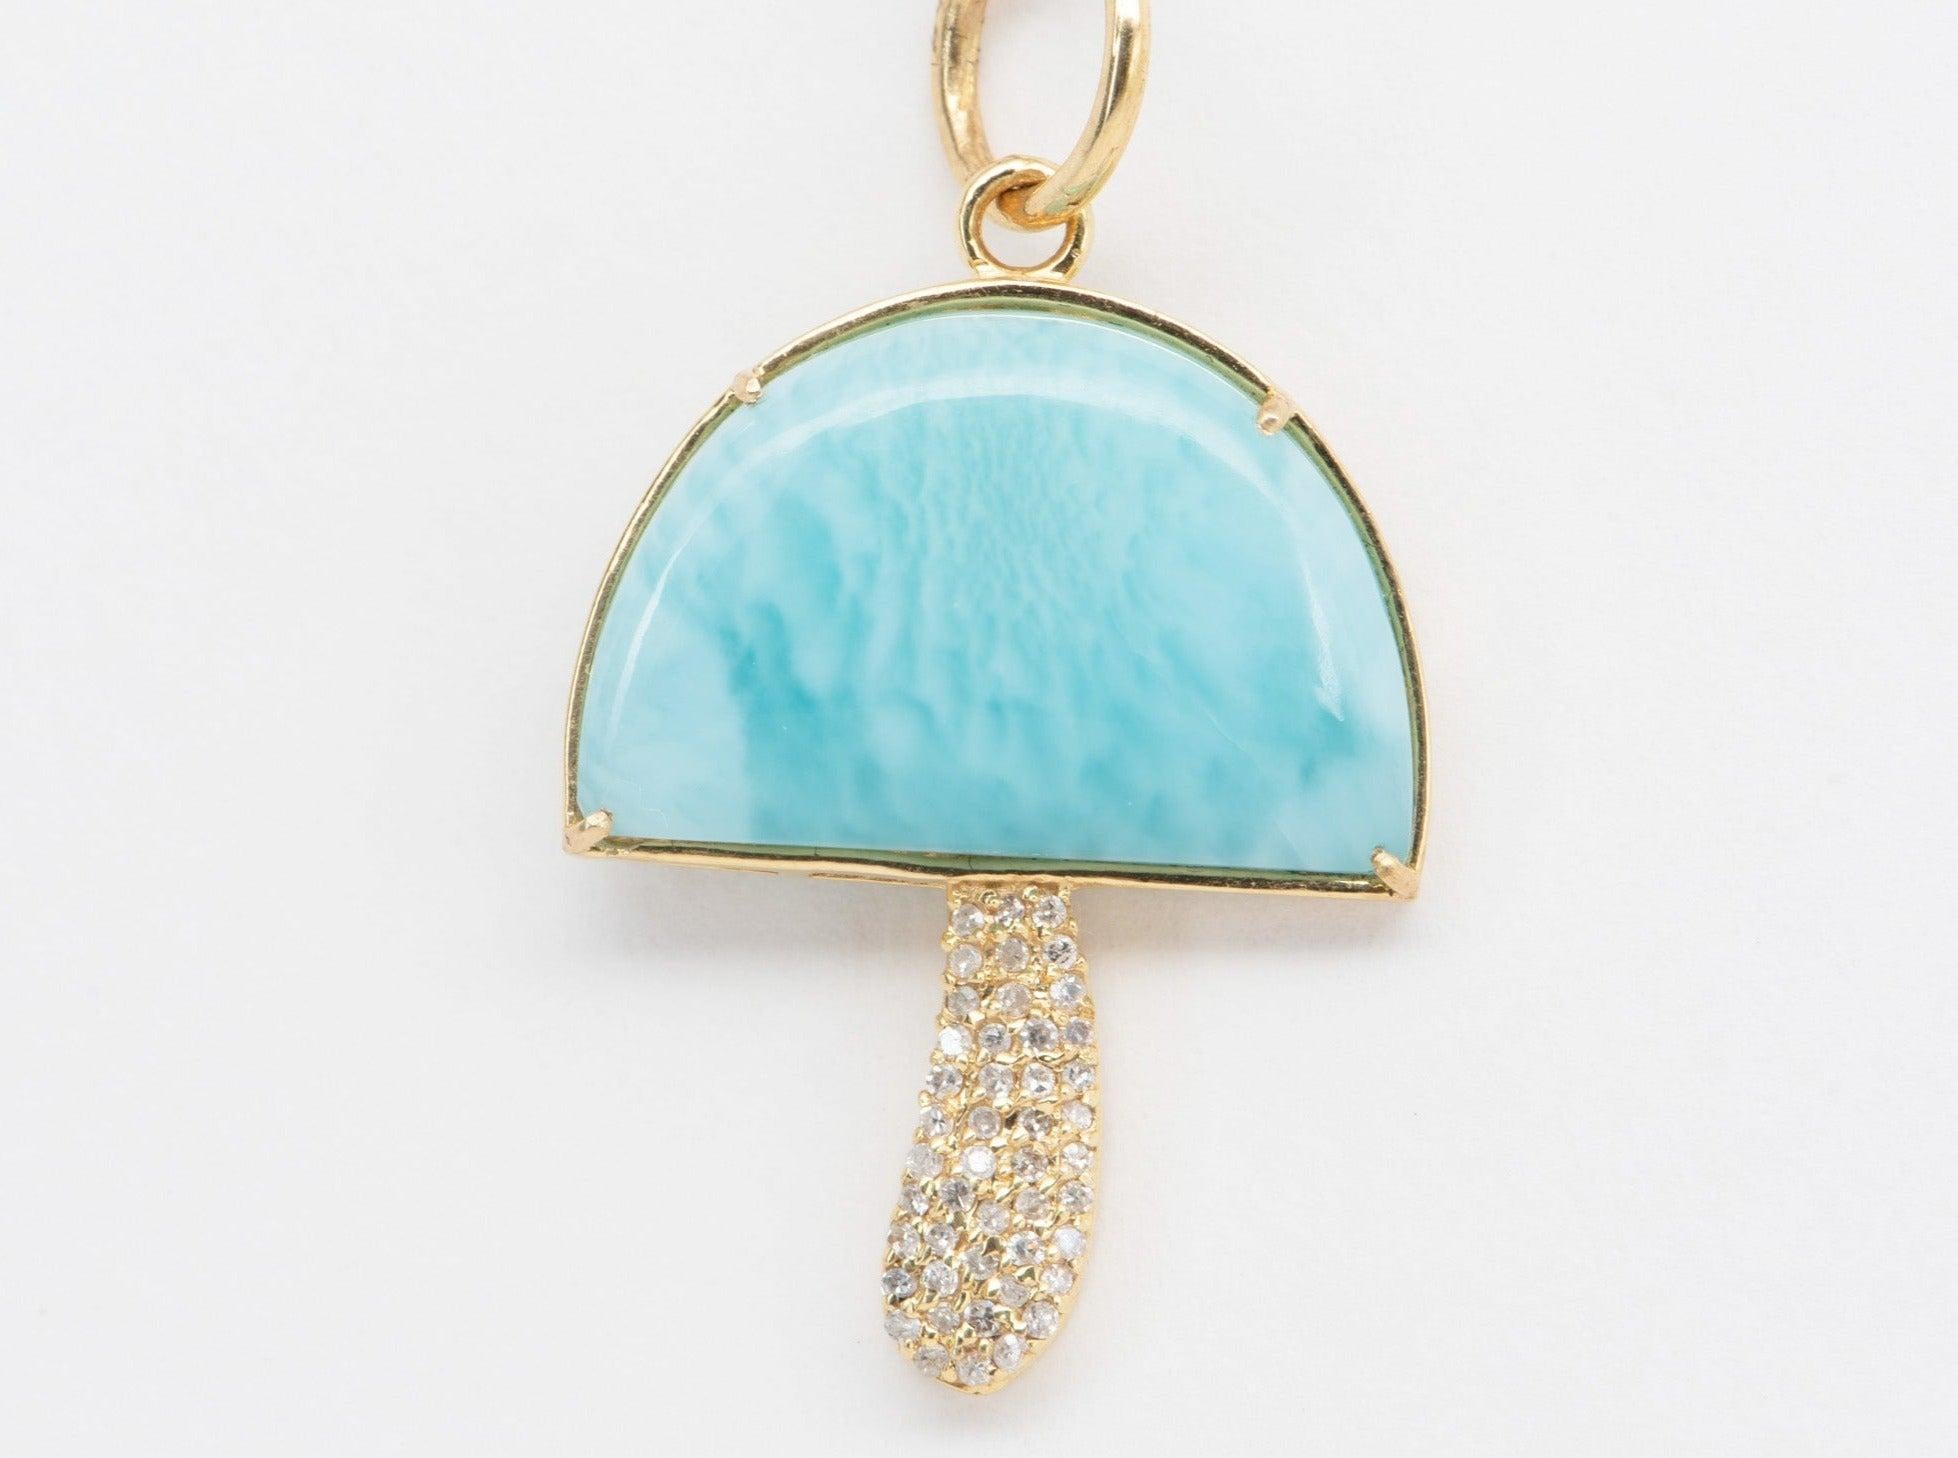 ♥ Solid 14k yellow gold Larimar mushroom and diamond stem pendant
♥ Gorgeous Blue color!
♥ The item measures 29.9 mm in length, 20,9 mm in width, and 5 mm in height.

♥ Gemstone: Larimar, Diamond 0.14ct
♥ All stone(s) used are genuine, earth-mined,